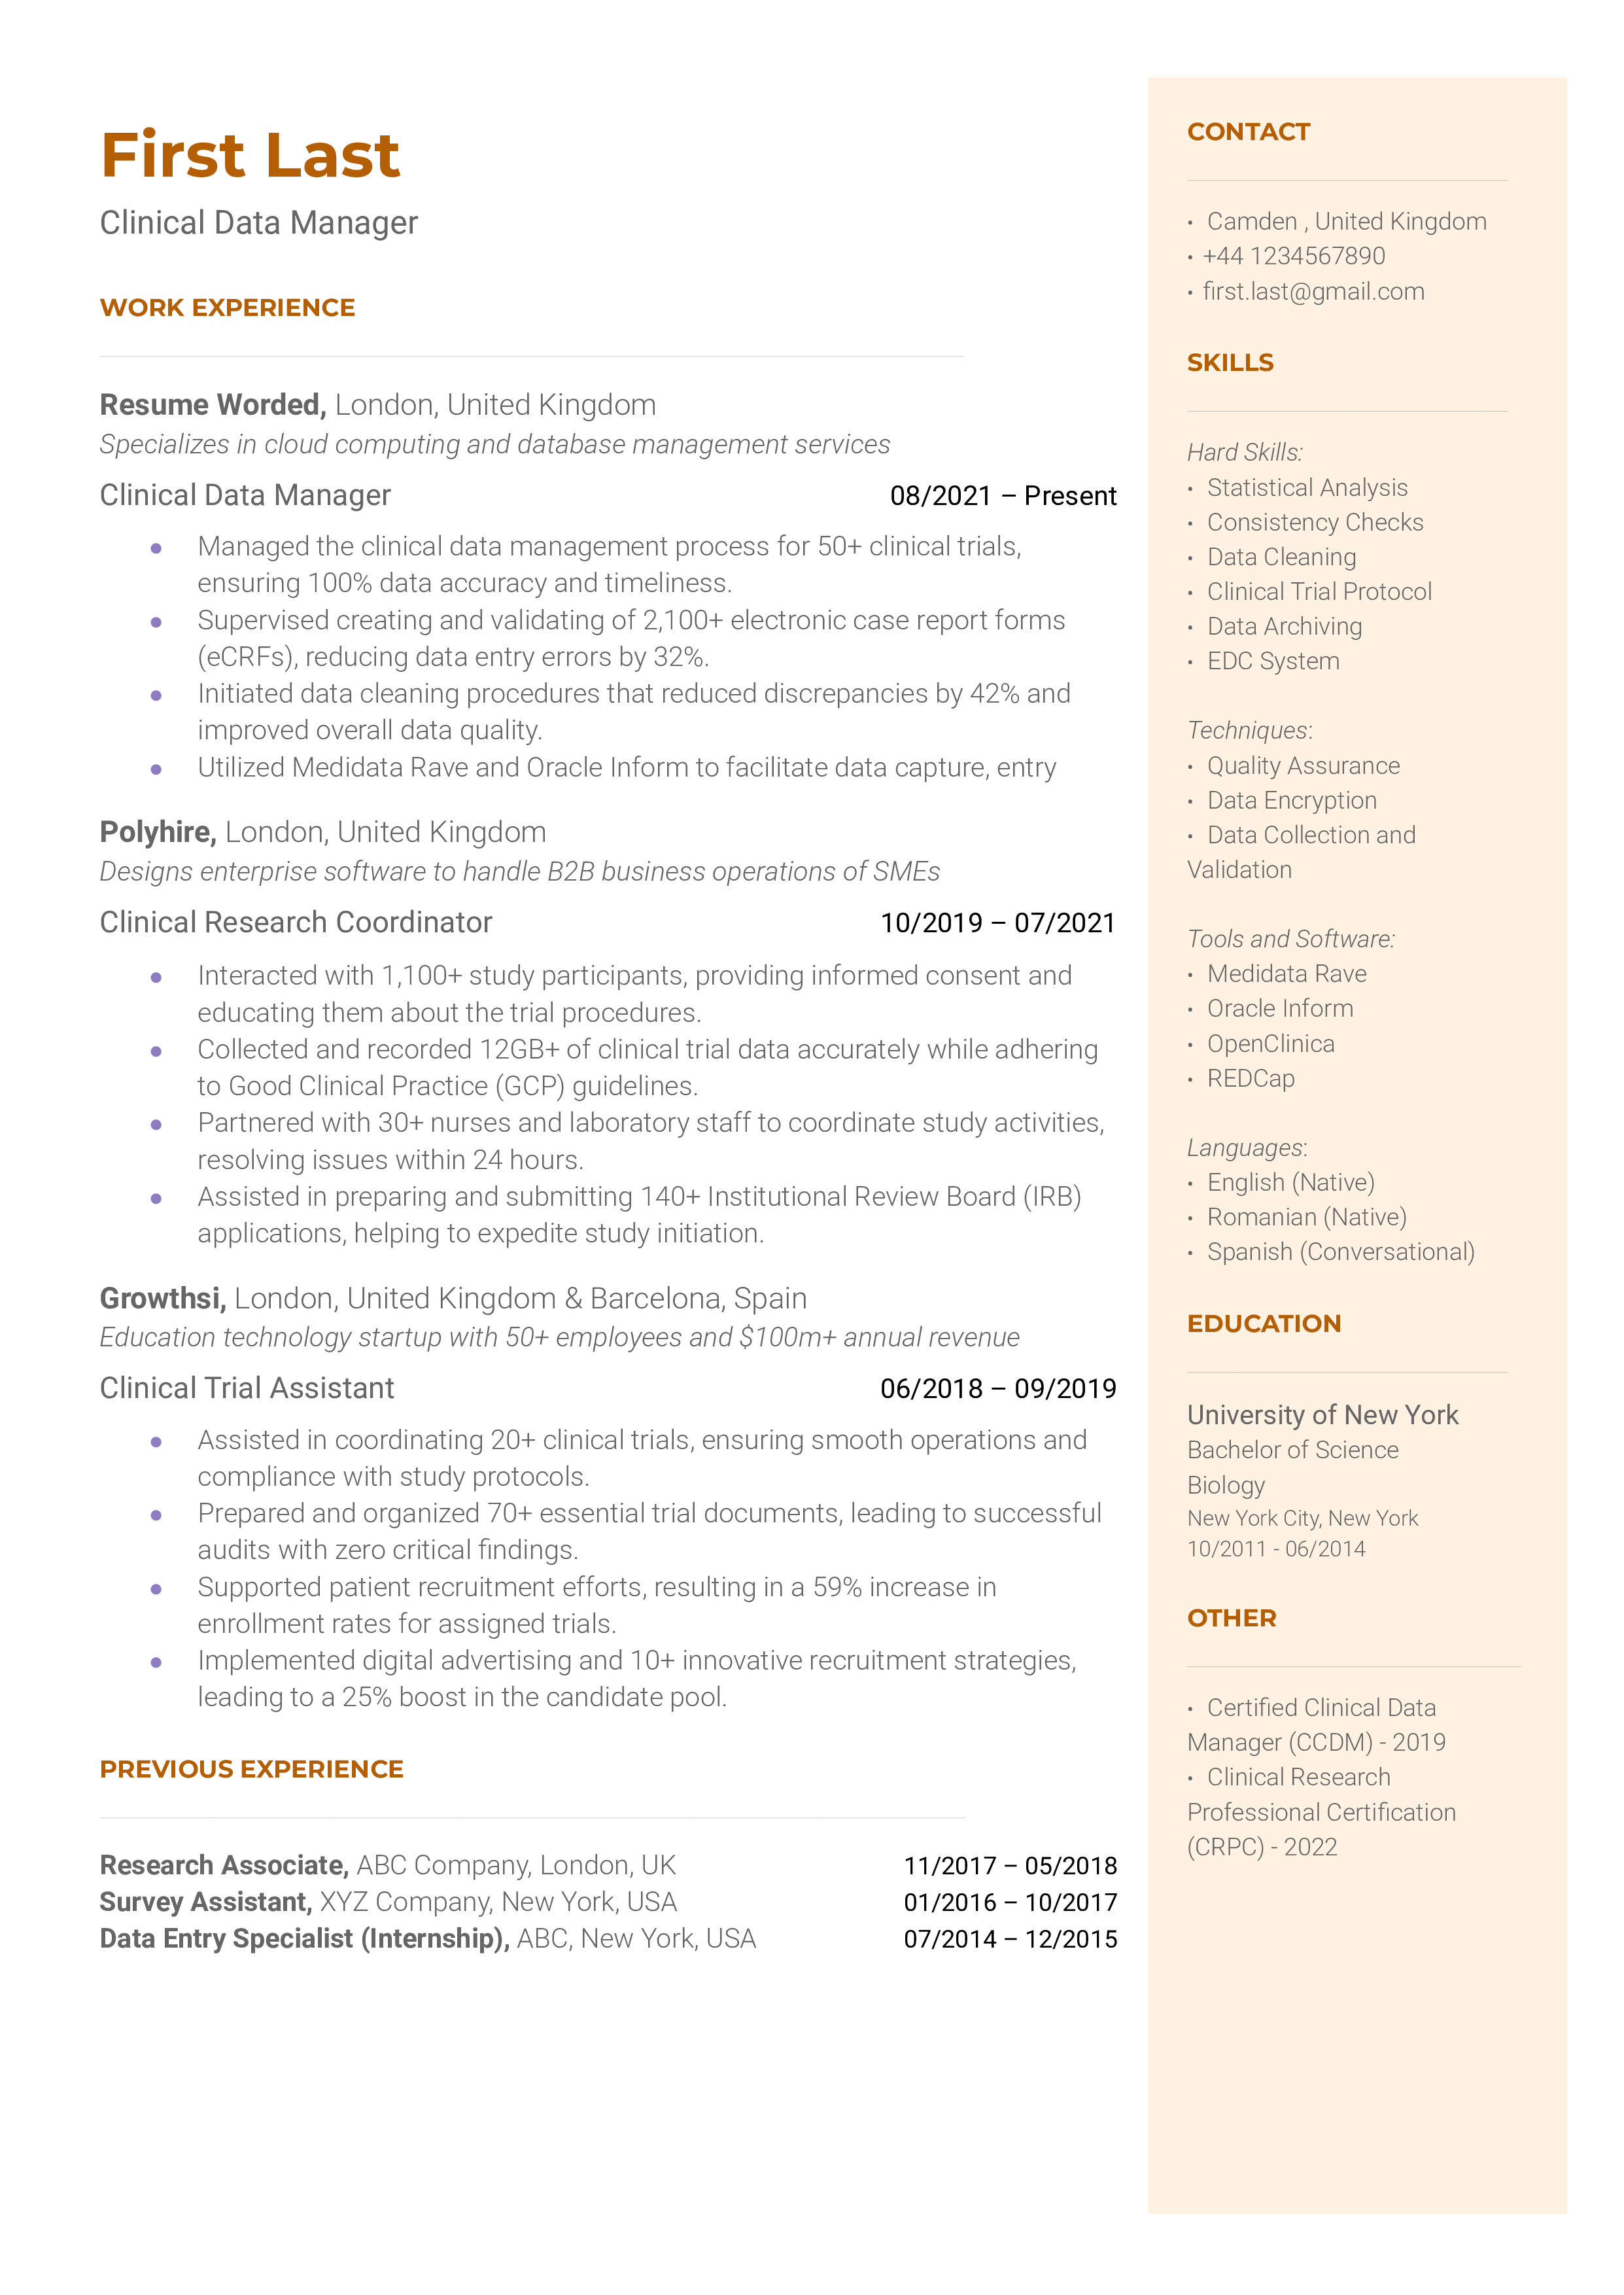 A resume for a Clinical Data Manager displaying their technical skills and regulatory knowledge.